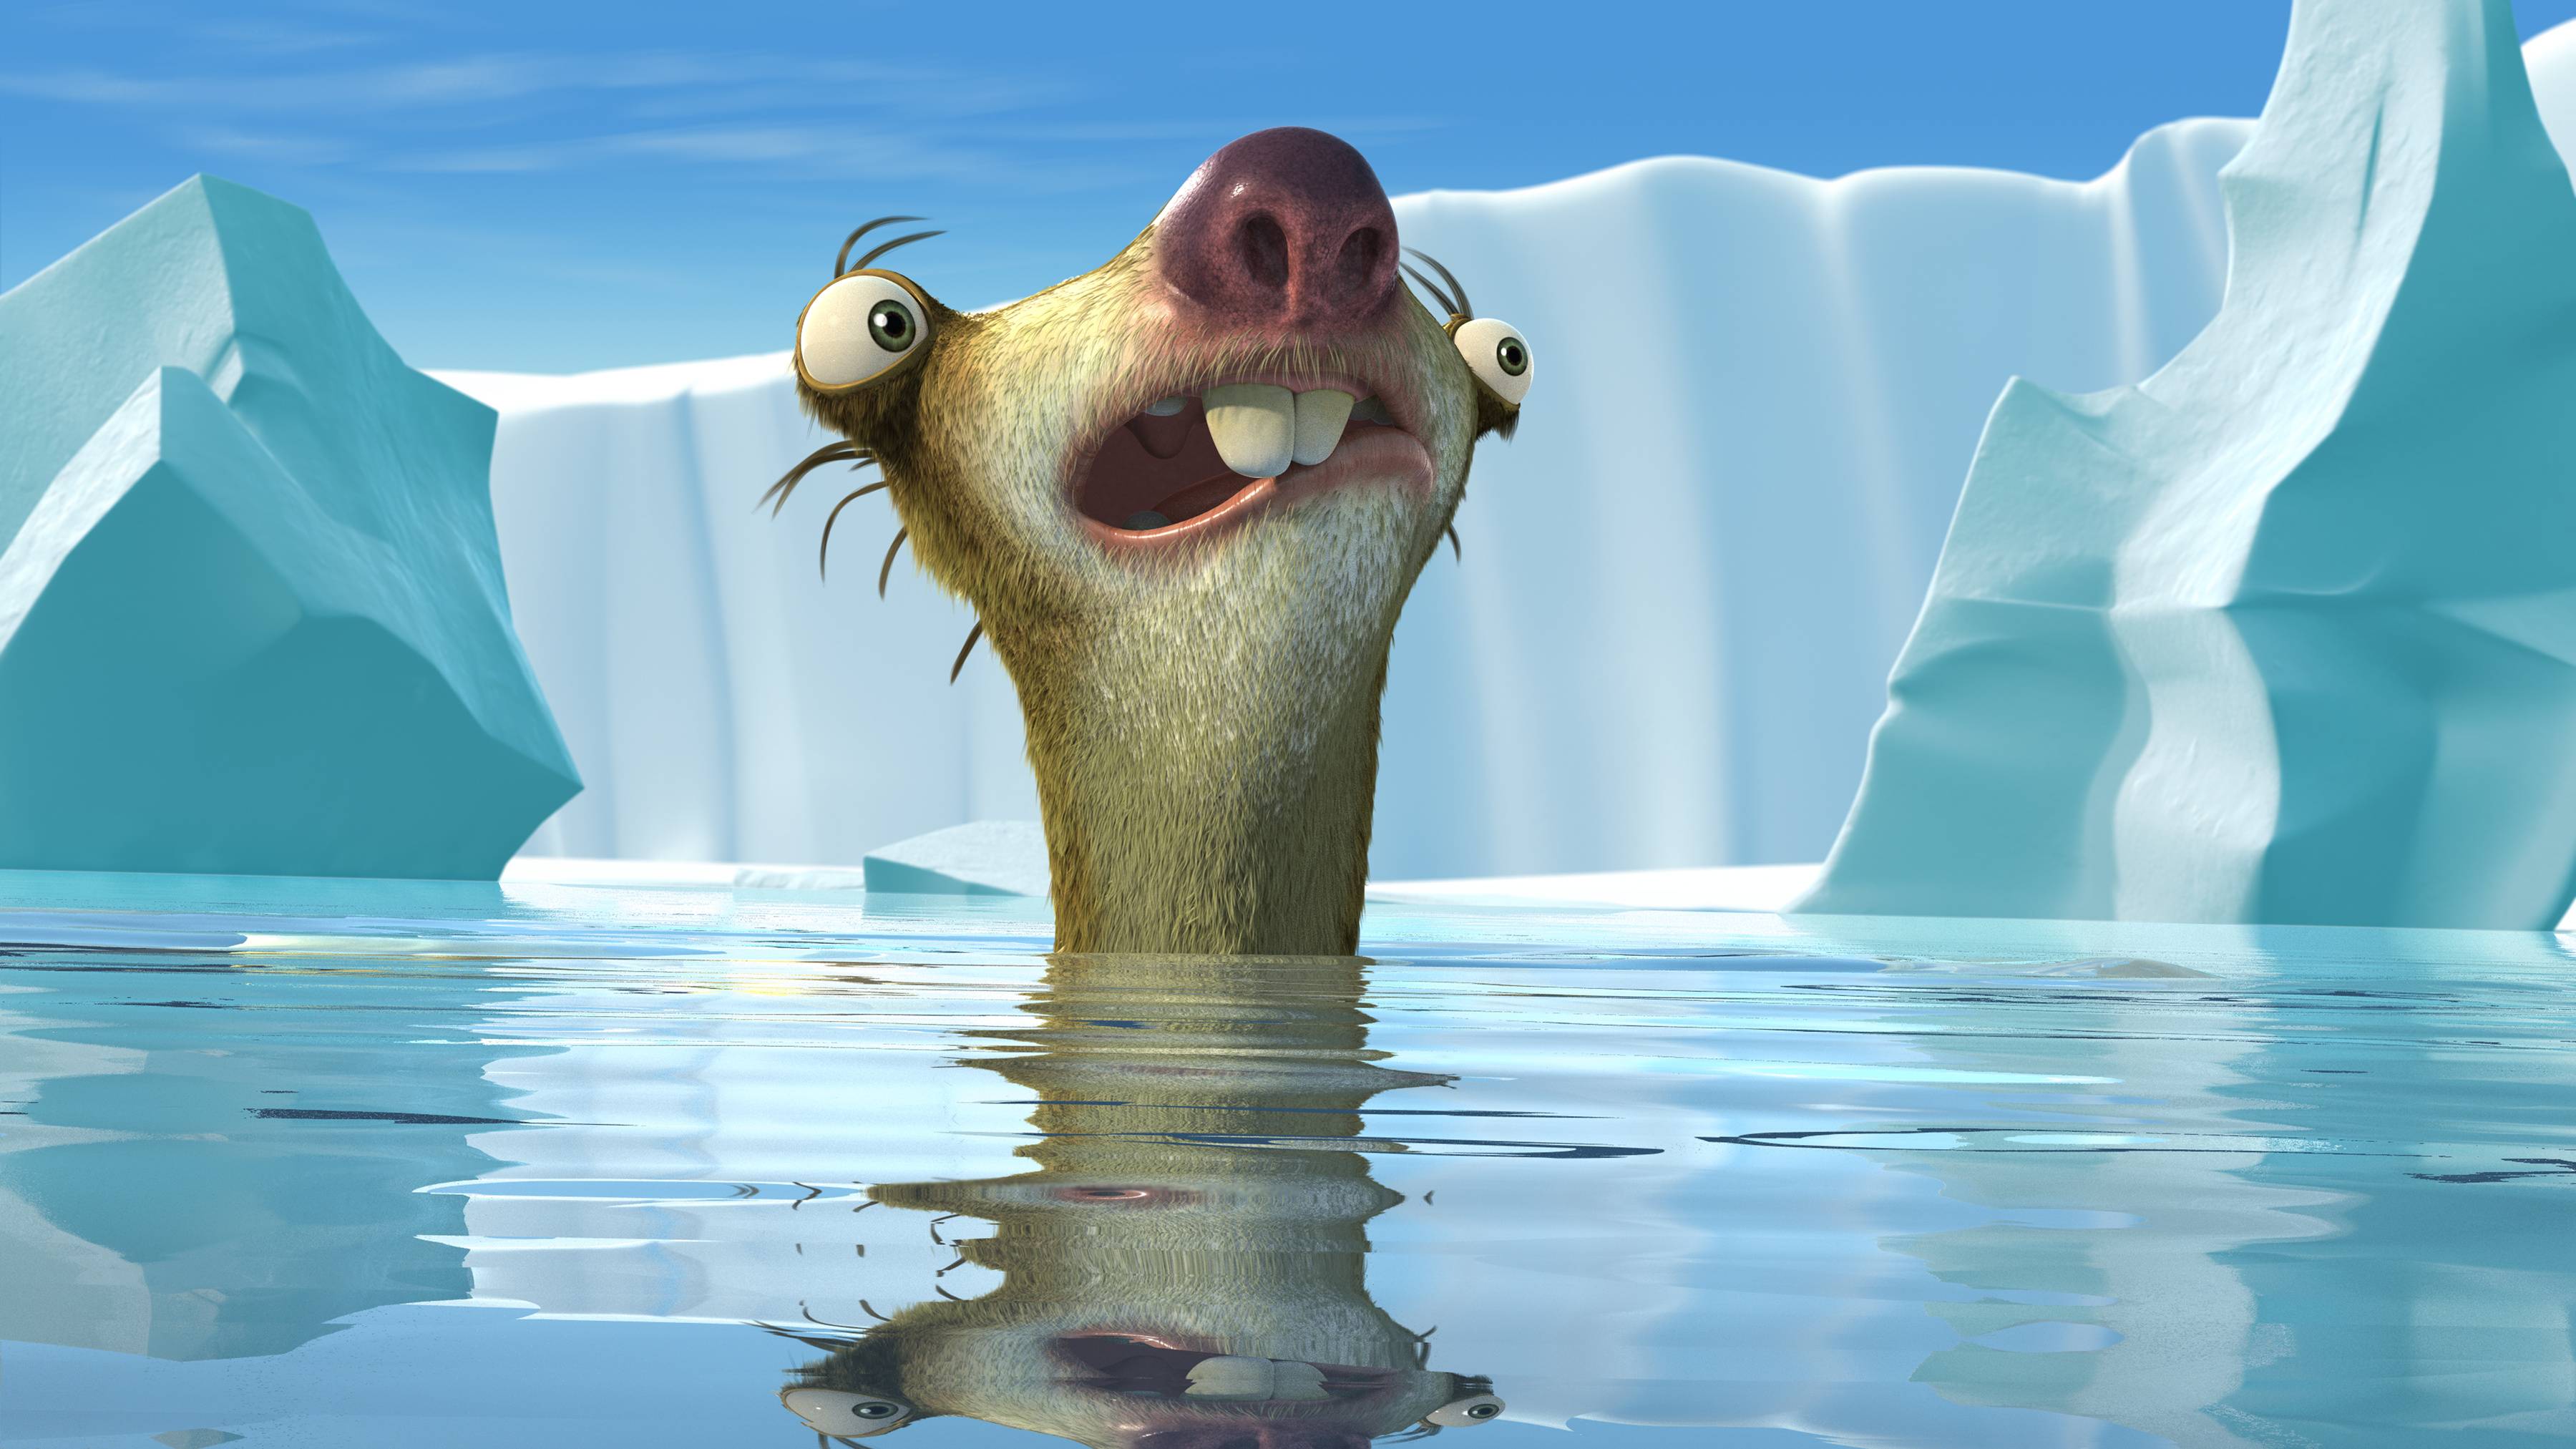 Ice Age Wallpapers - Wallpaper Cave